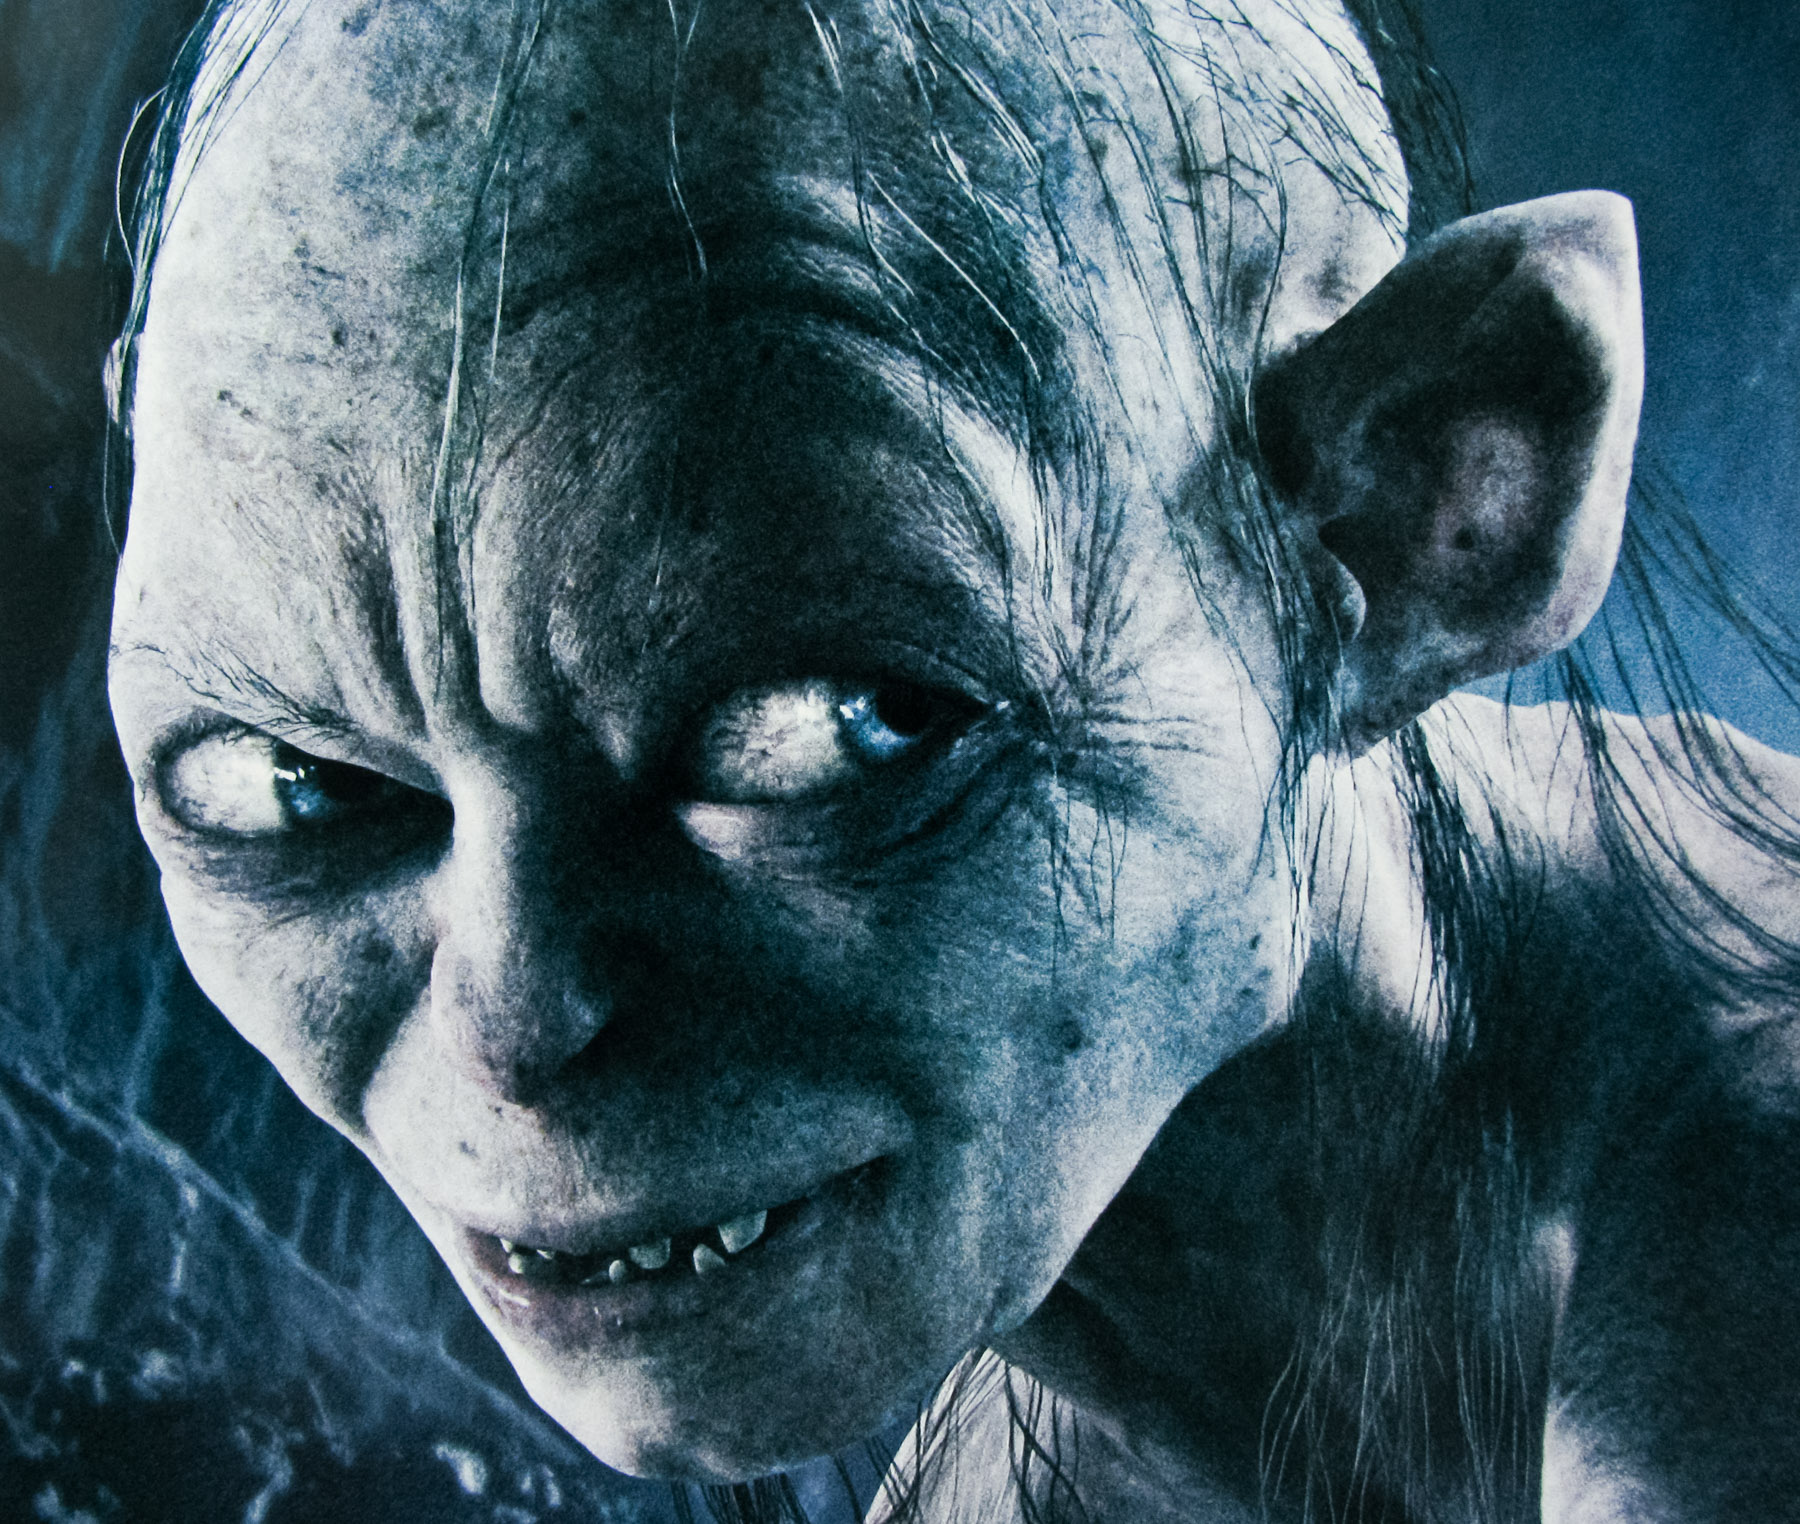 which lord of the rings movie do we learn about gollum